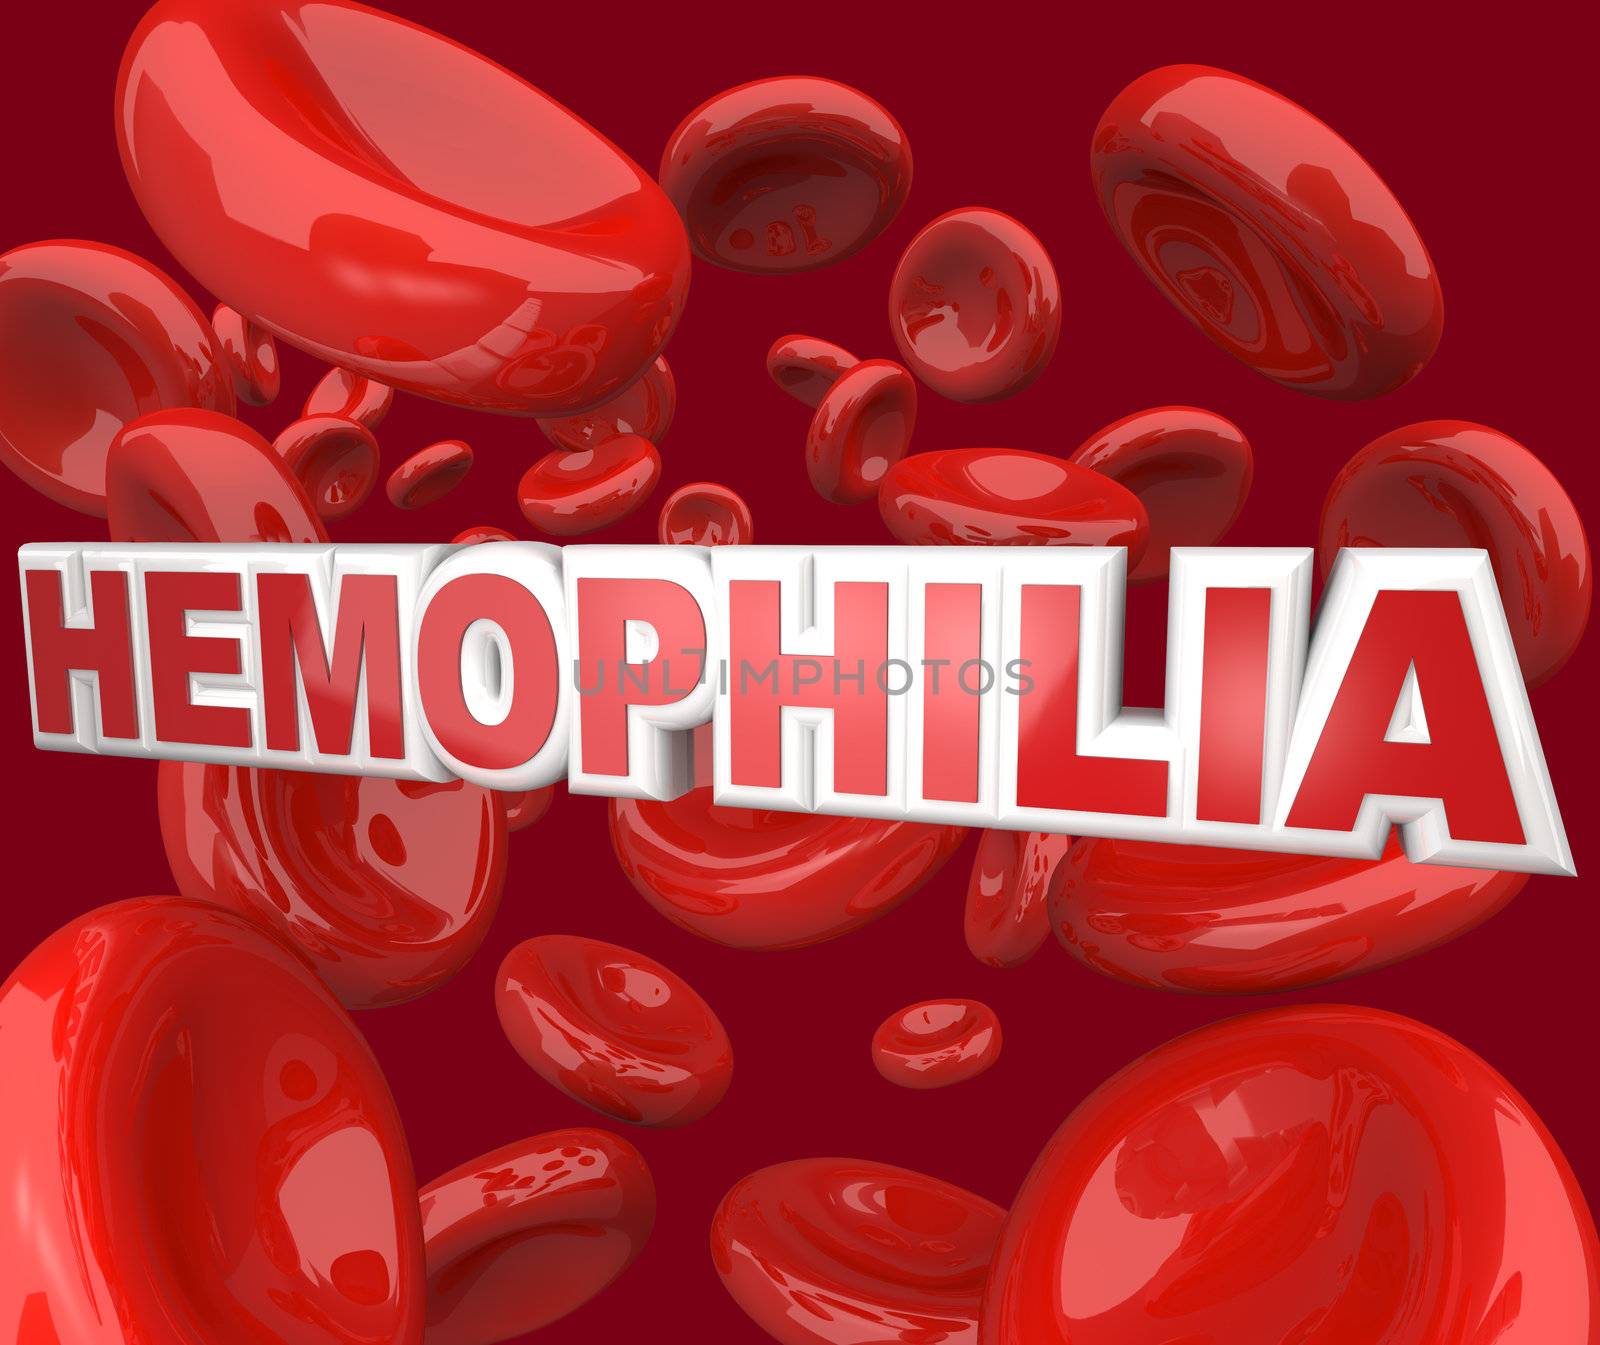 The word Hemophilia in 3D letters floating in an artery blood stream, representing the blood disorder or disease that affects people who cannot form clots to close wounds